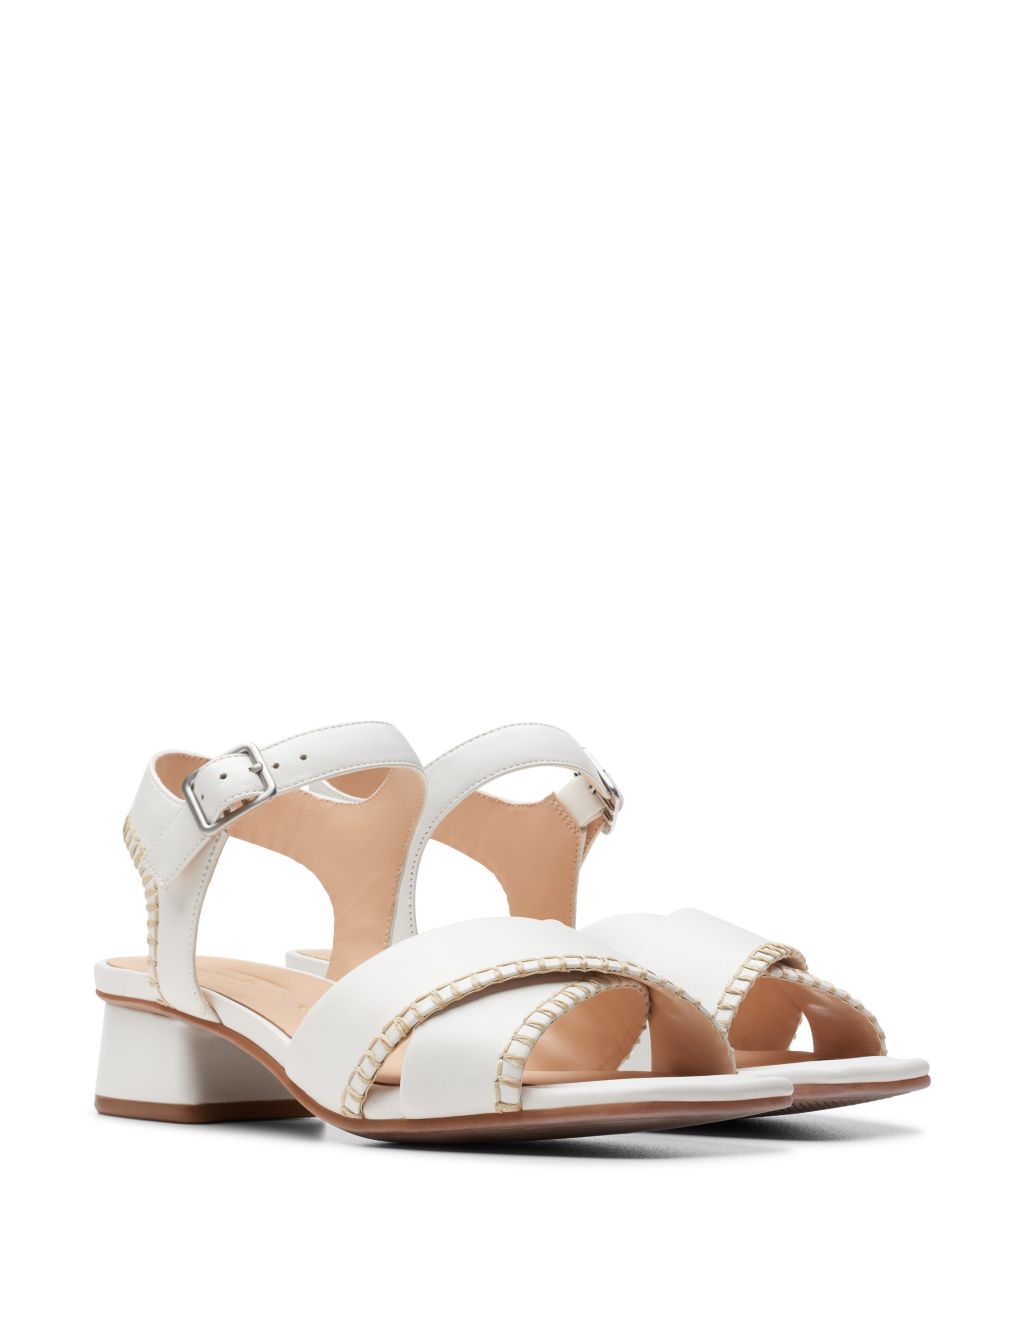 Wide Fit Leather Strappy Block Heel Sandals | CLARKS | M&S